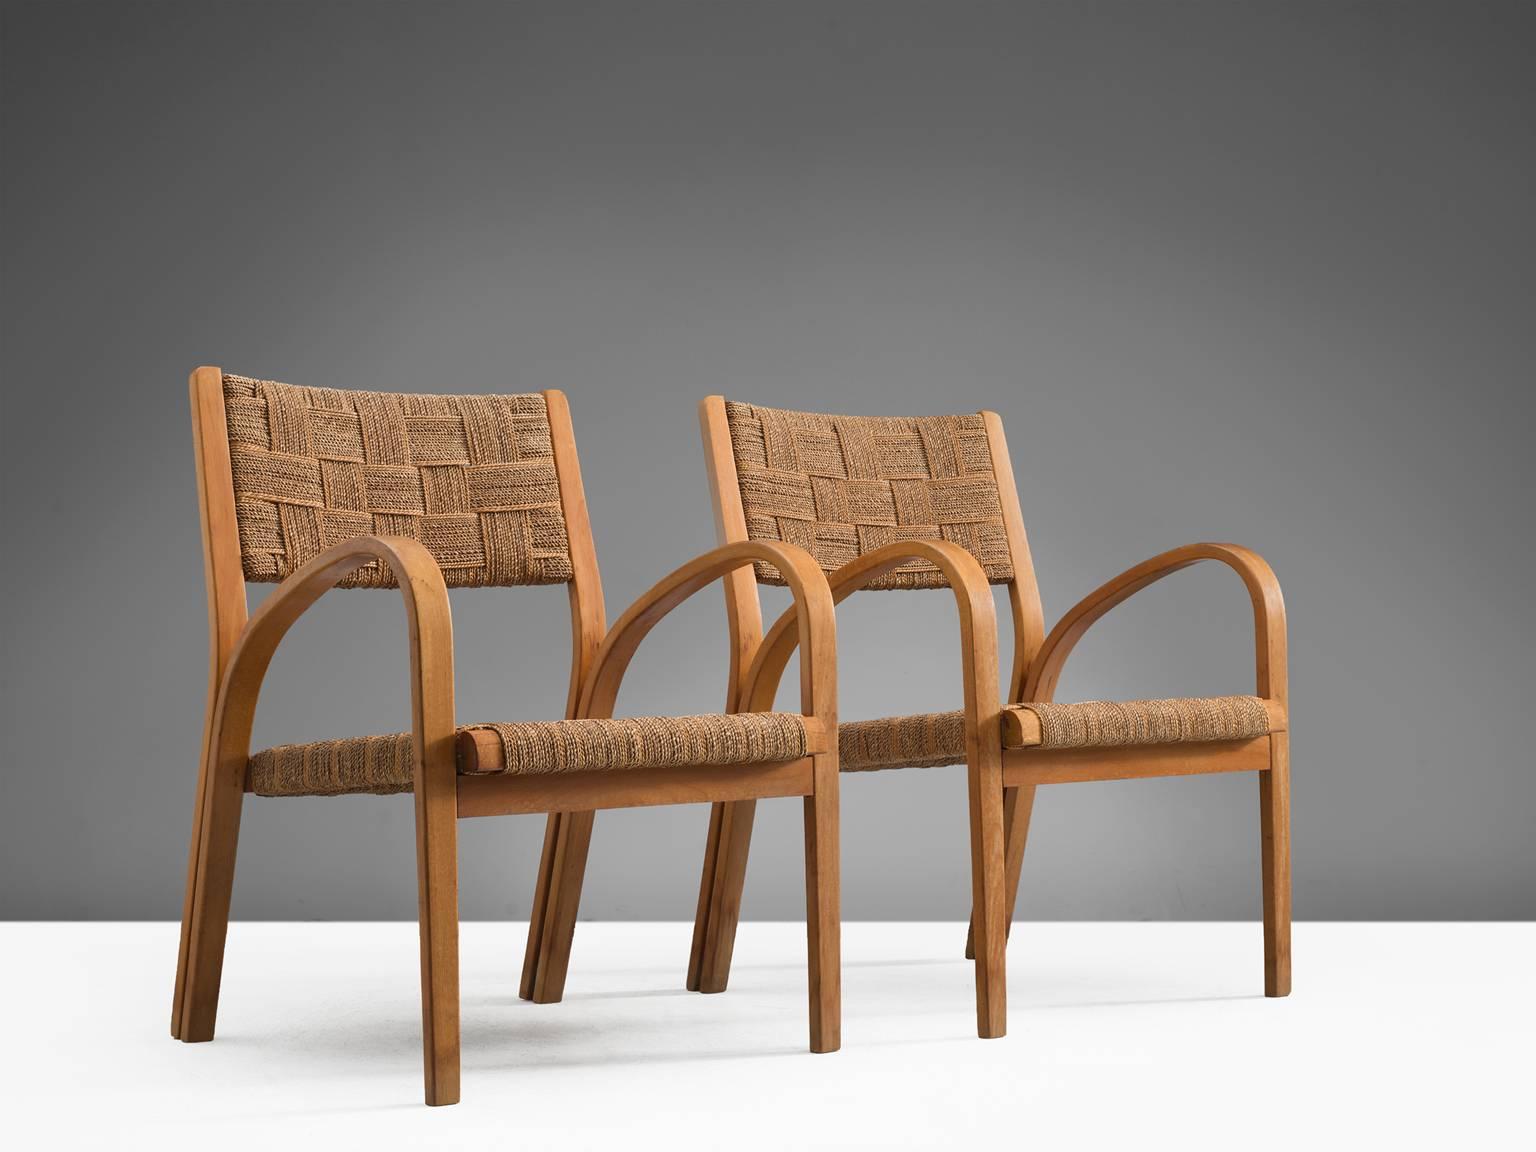 Armchairs with ottomans attributed to Giuseppe Pagano, curved wooden structure coated rope, Italy, 1940s.

These lounge chairs are executed in wood and coated rope. The design of this set of chairs is Minimalist yet not in a Puritan way. The